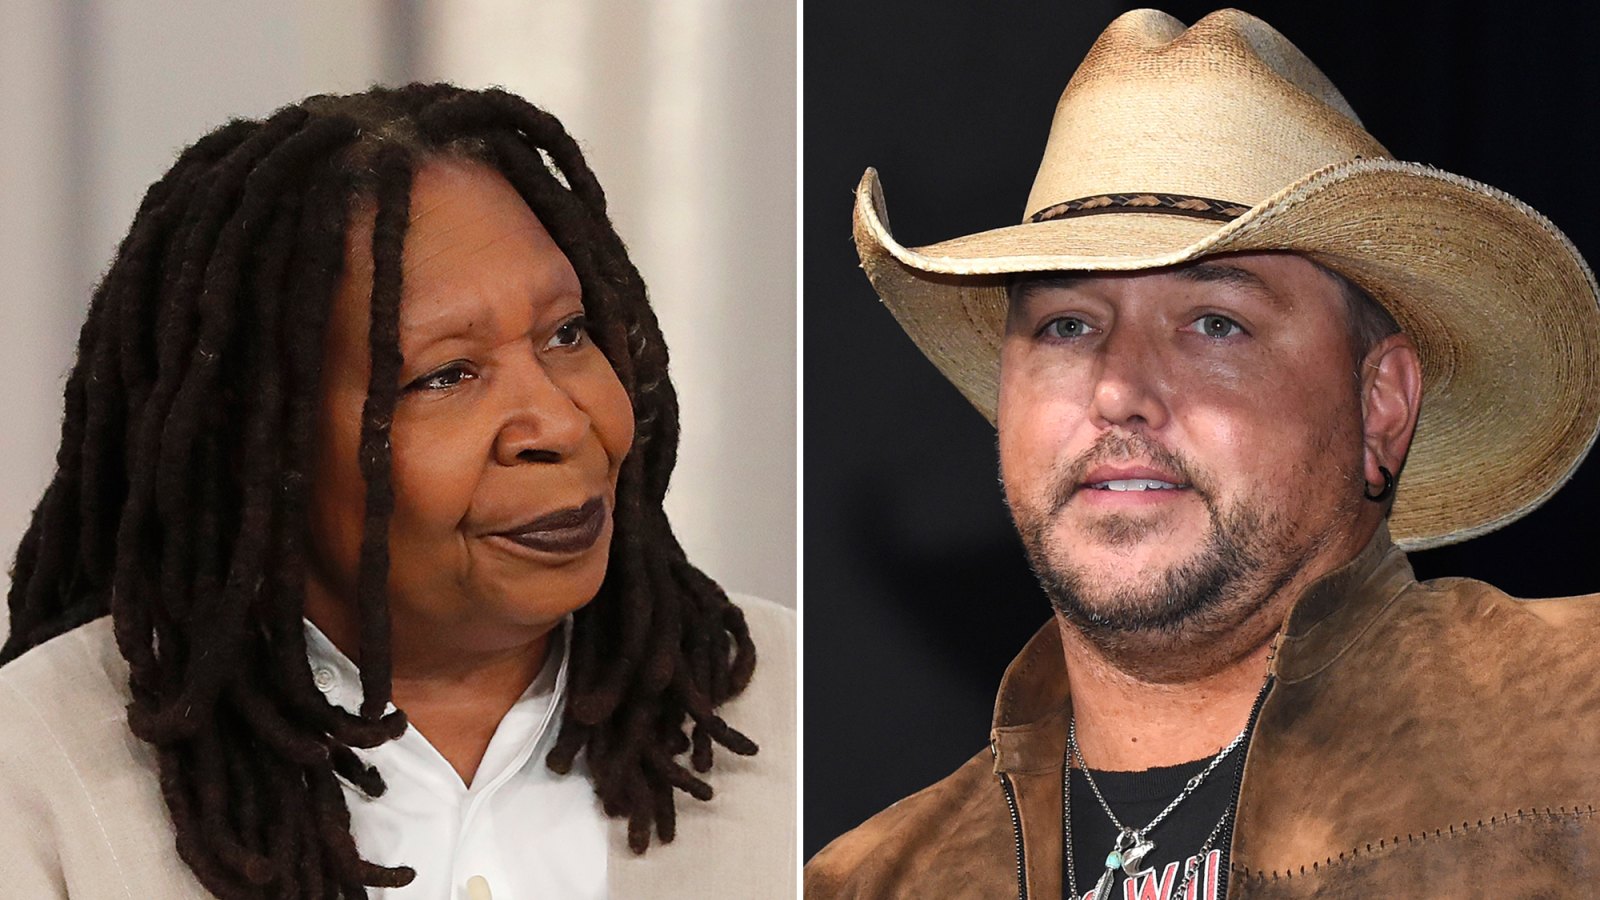 'The View' Hosts Slam New Controversial Jason Aldean Song For Going 'Too Far'